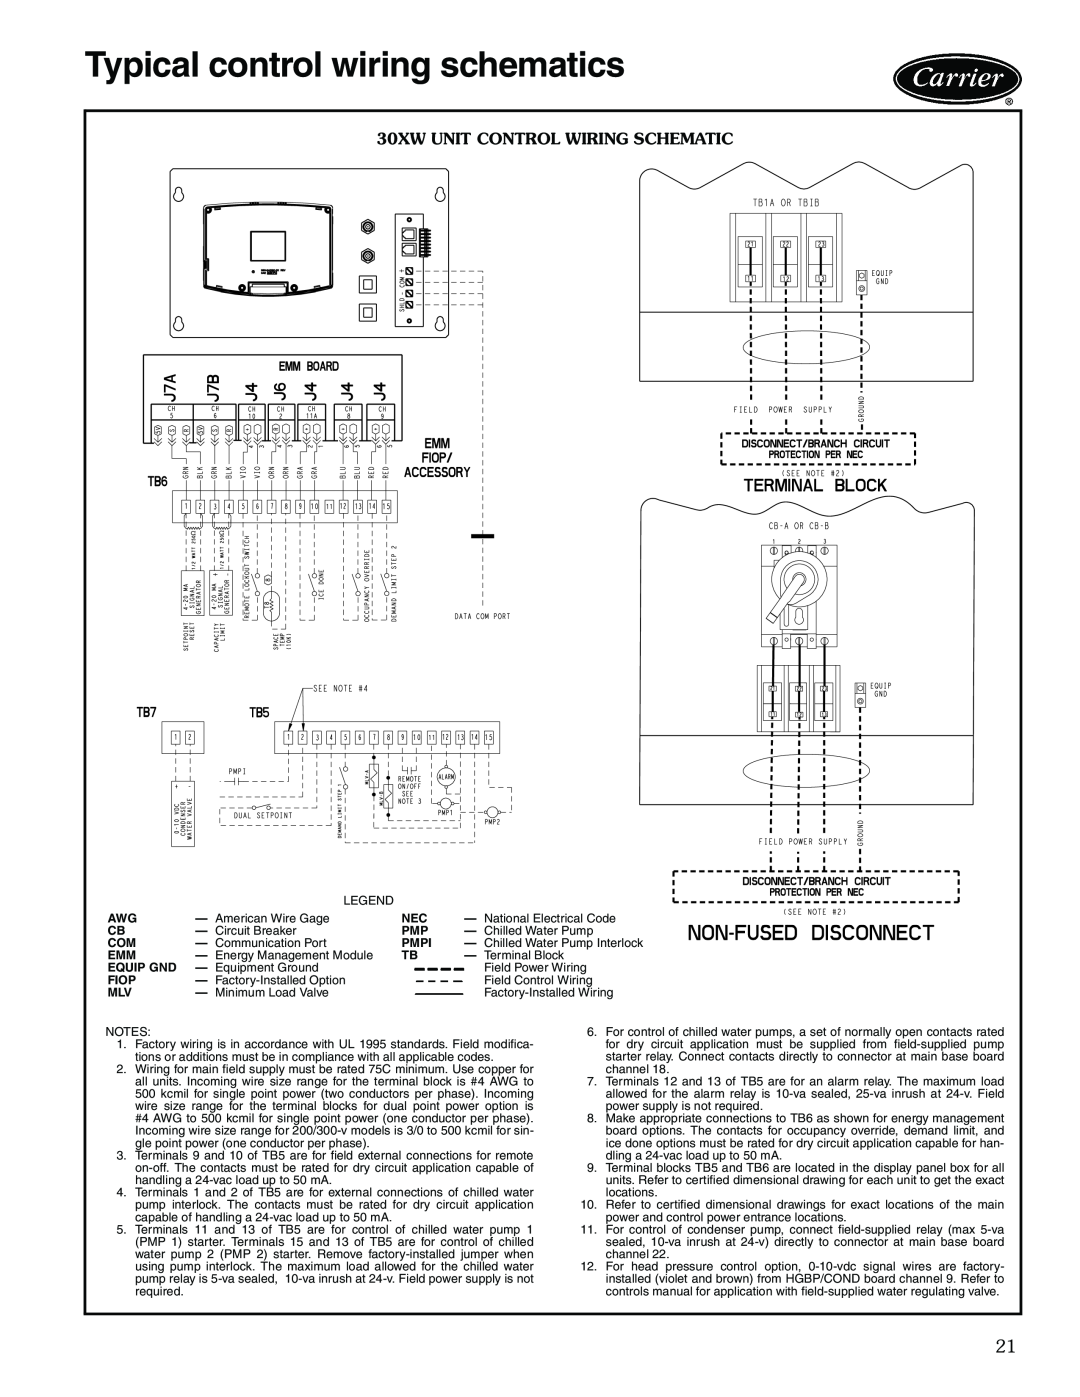 Carrier 30XW325-400 manual Typical control wiring schematics, a30-4697, 30XW UNIT CONTROL WIRING SCHEMATIC 